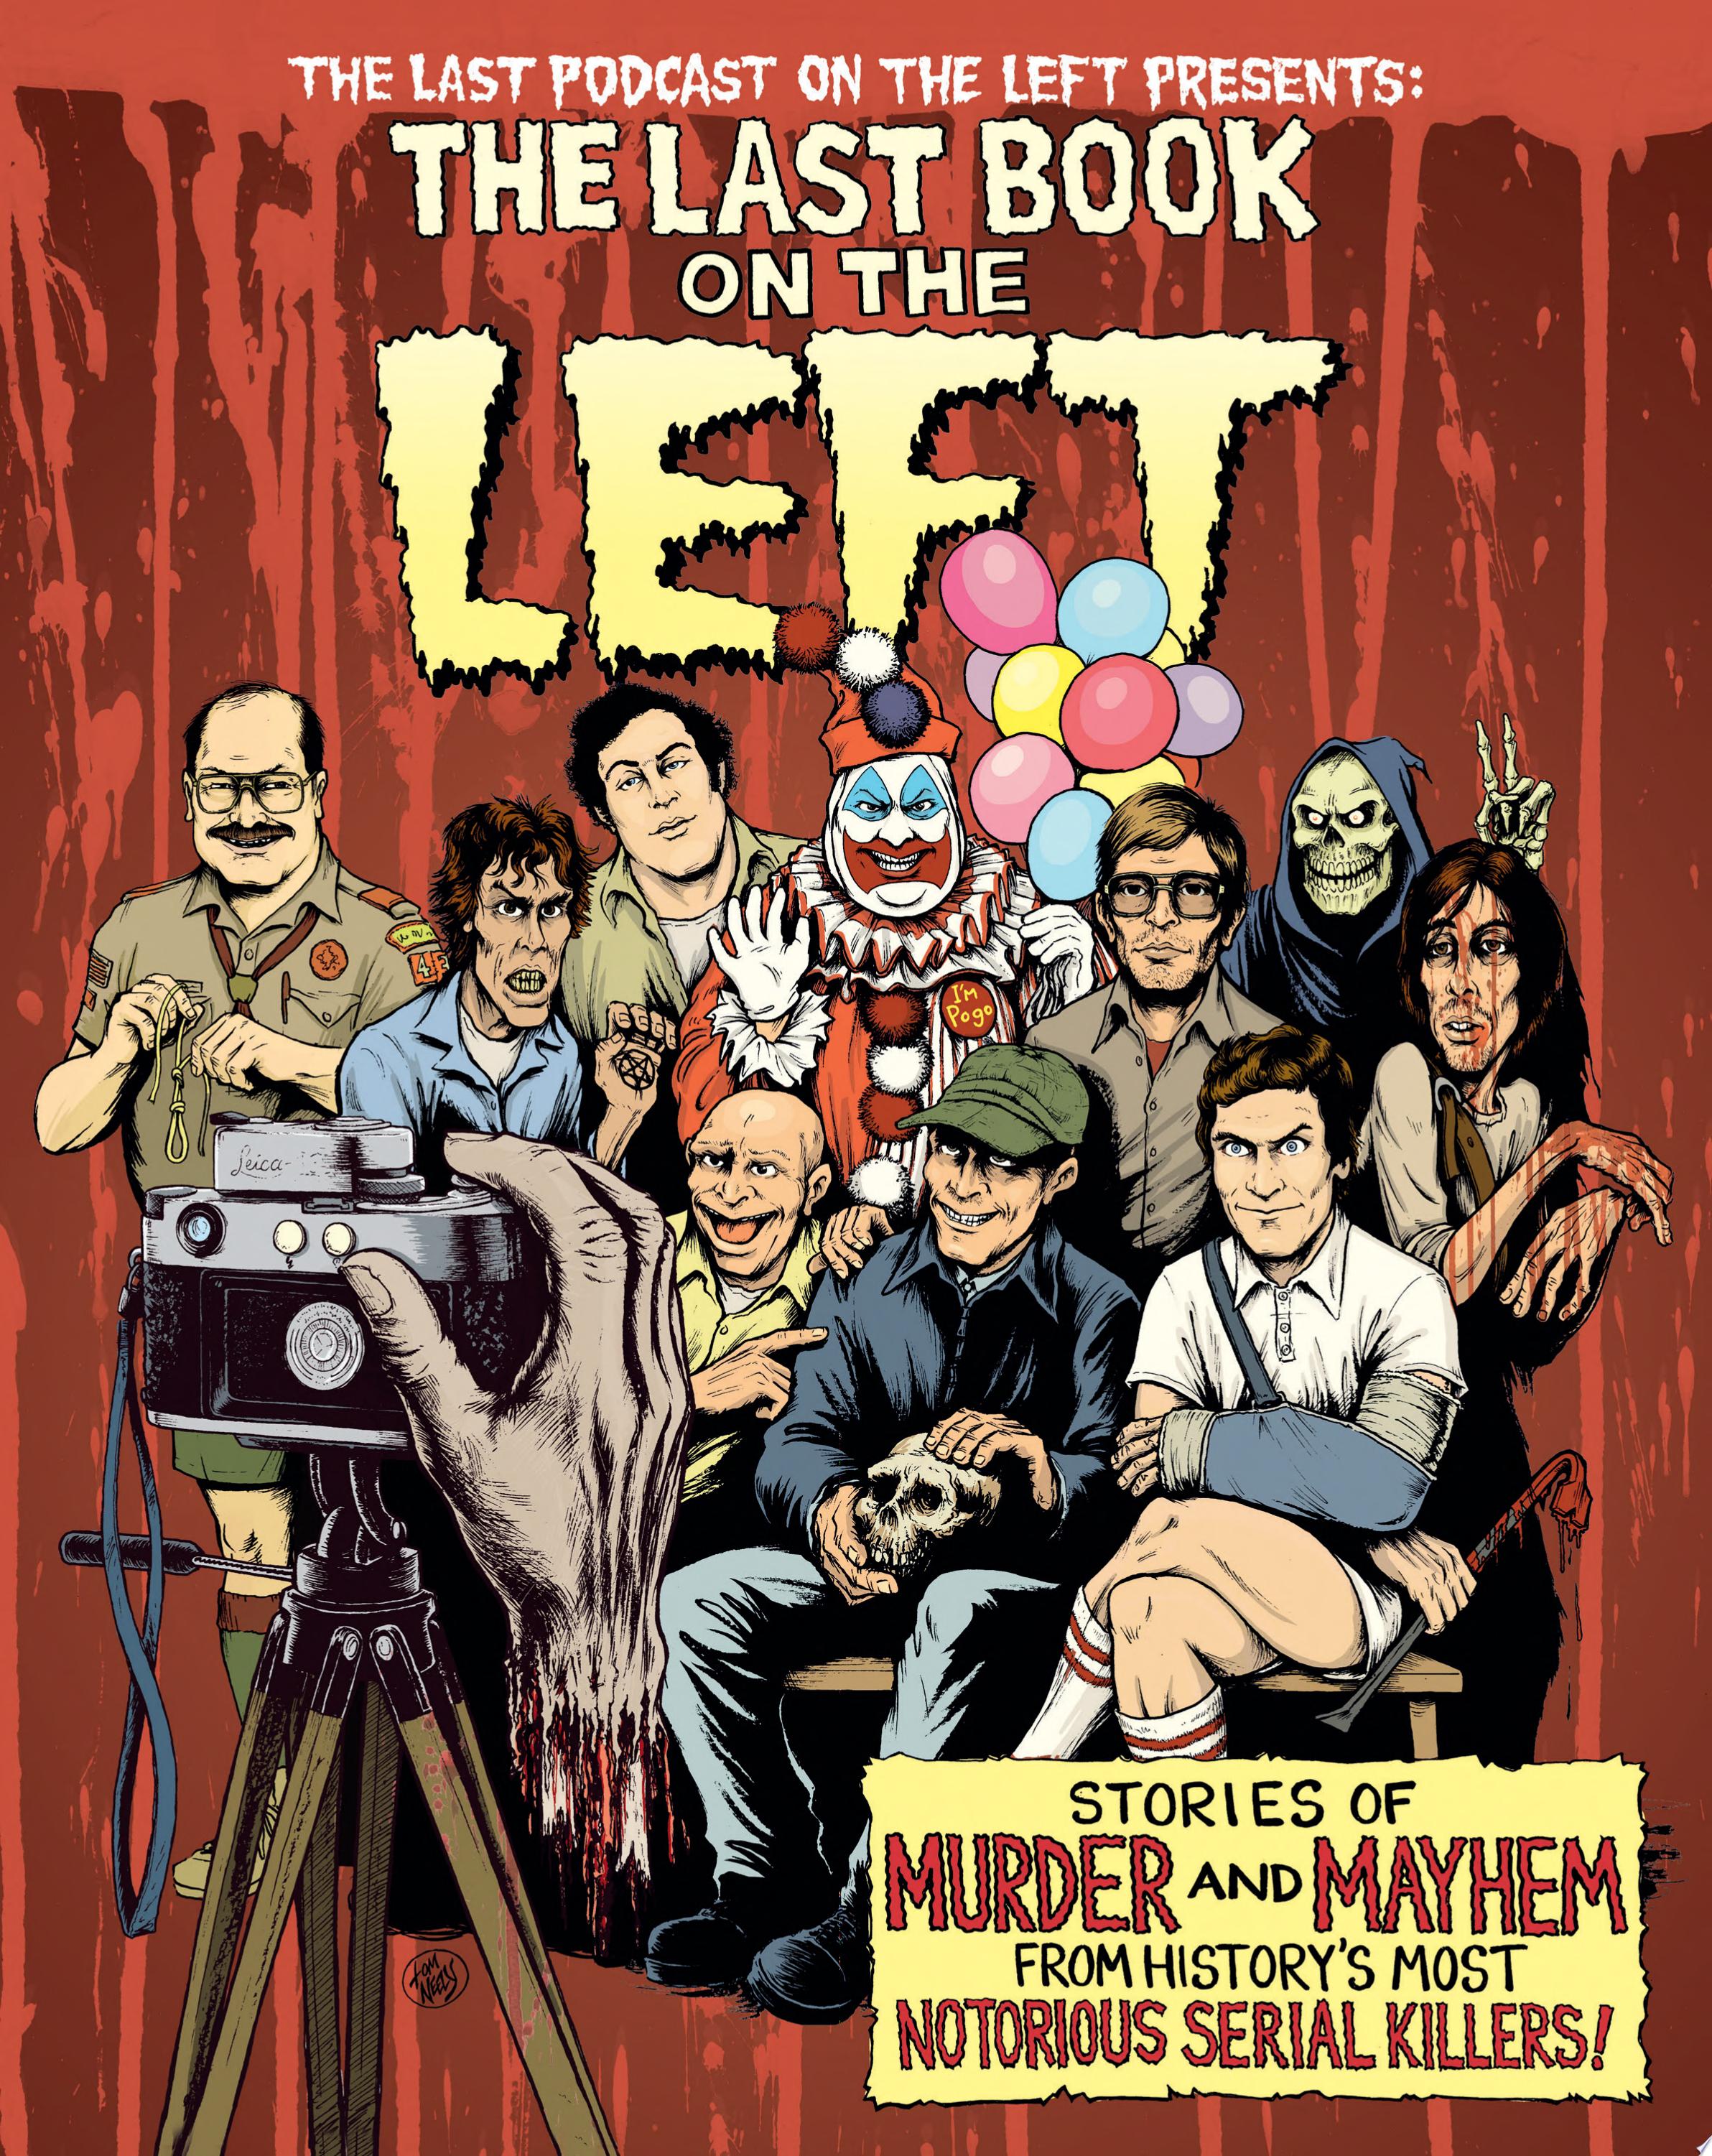 Image for "The Last Book on the Left"